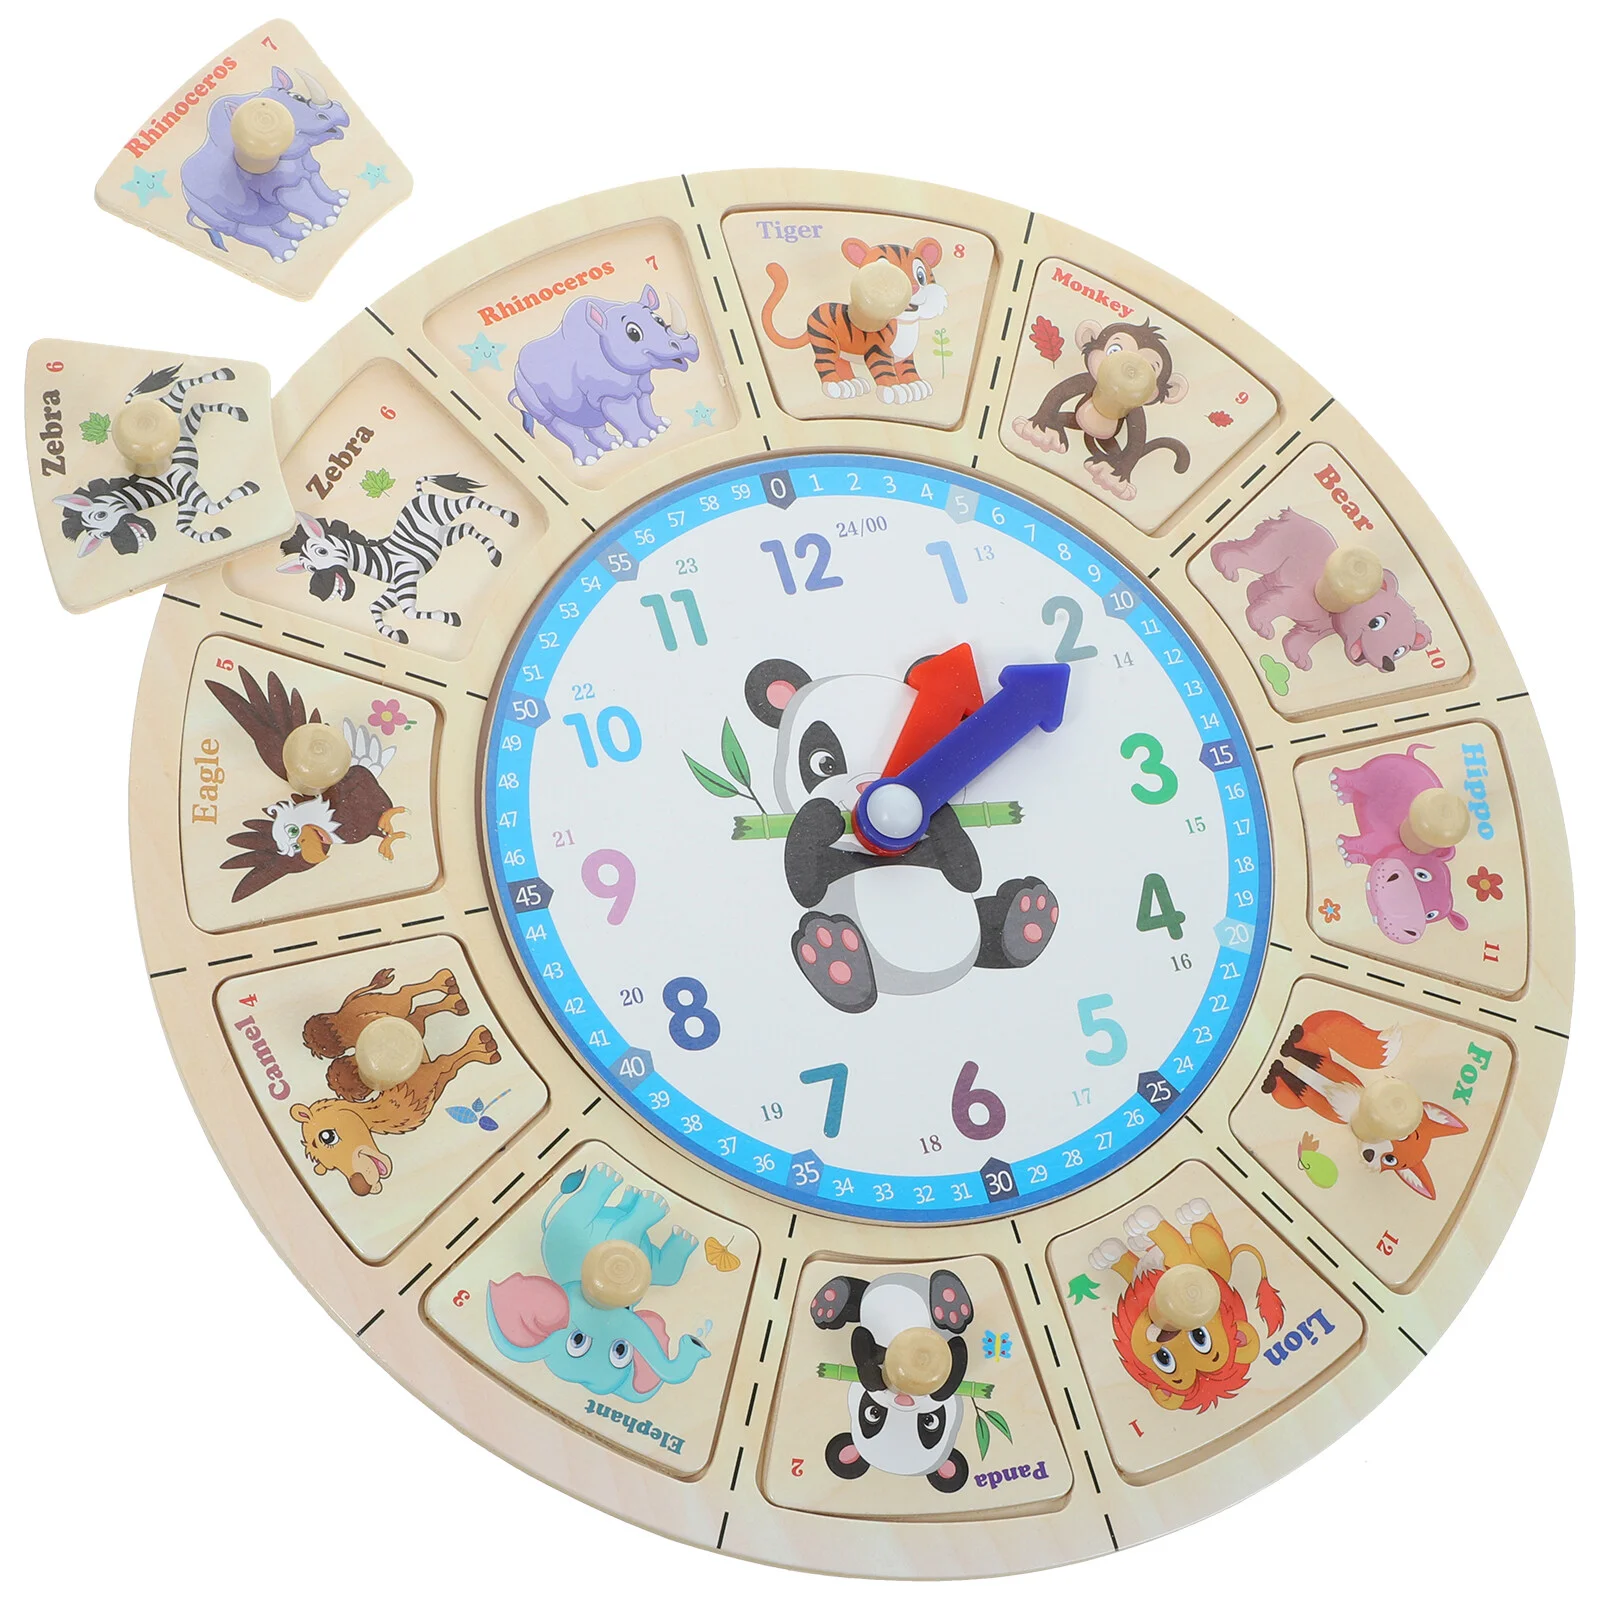 

Jigsaw Wood Clock Learn Tell Time Kids Educational Games 5-7 Telling Teaching Cognitive